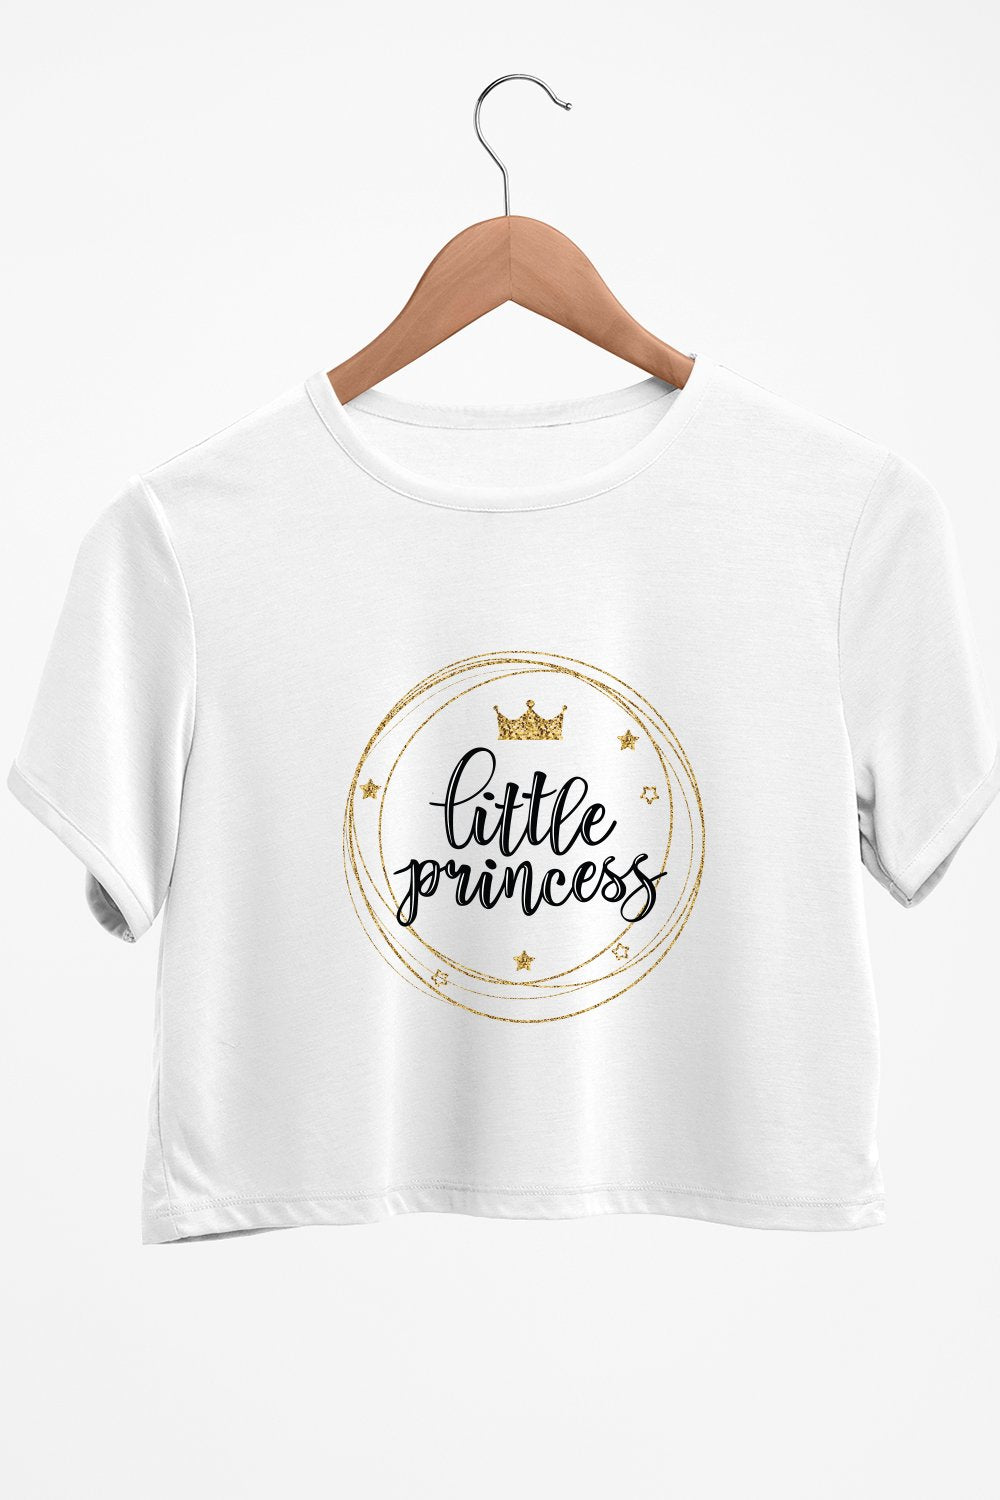 Little Princess Graphic Printed White Crop Top